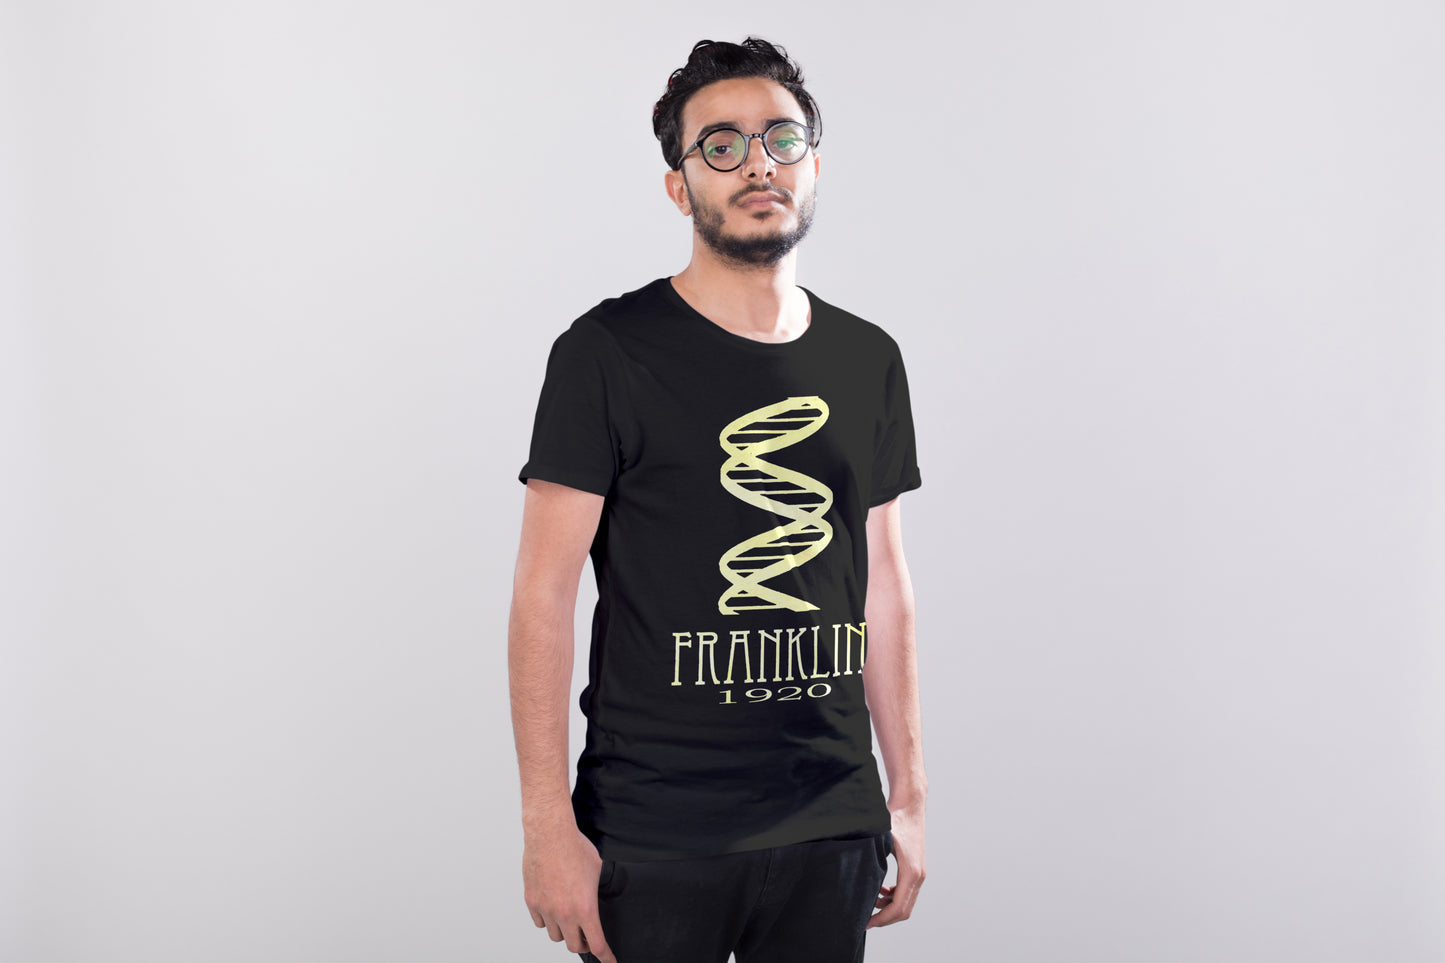 Franklin Double Helix T-shirt, Rosalind Franklin Chemistry And Physics DNA Graphic Tee